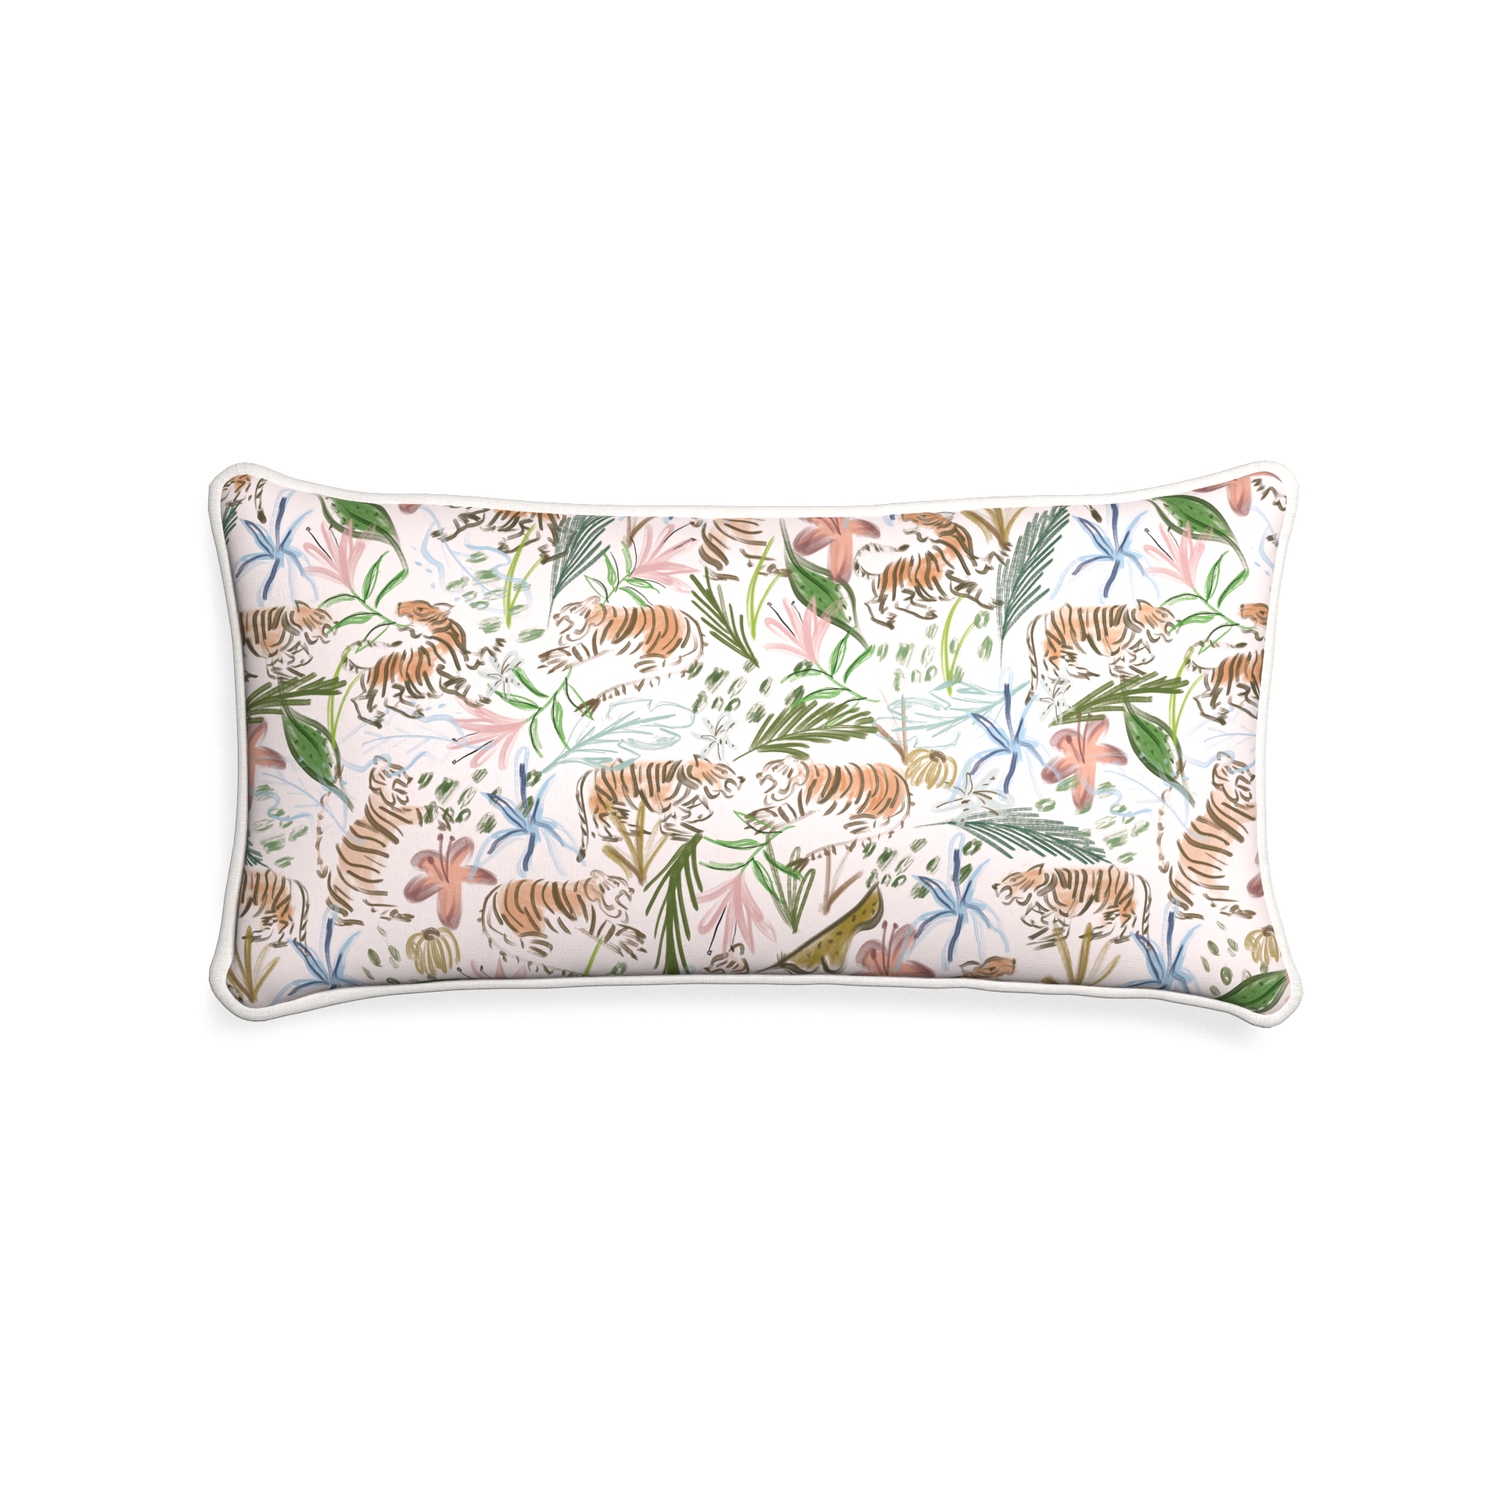 Midi-lumbar frida pink custom pink chinoiserie tigerpillow with snow piping on white background